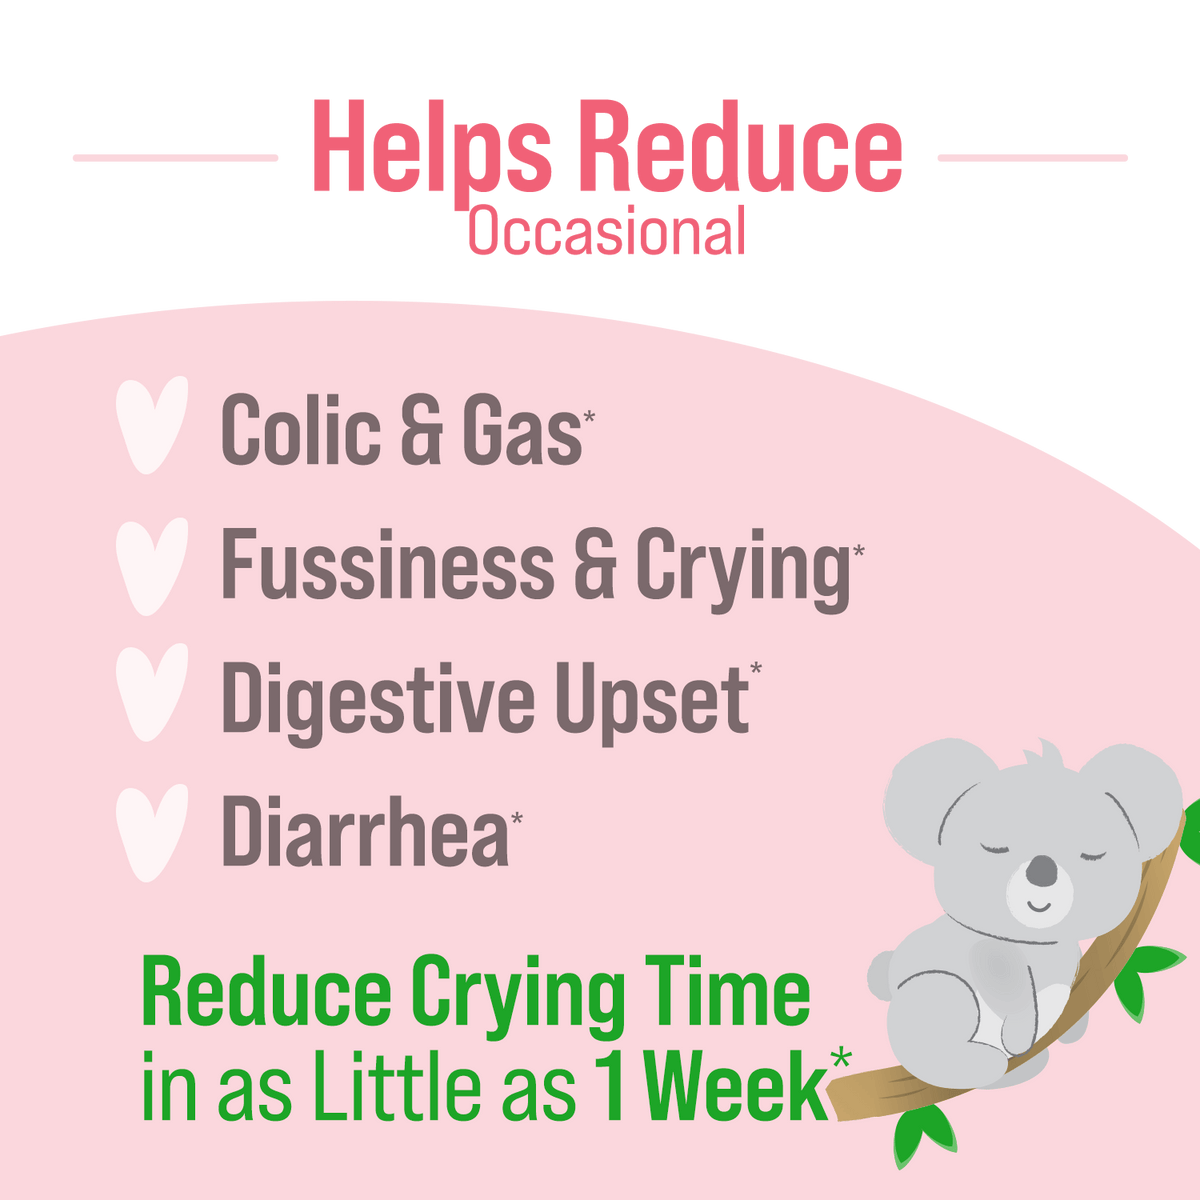 helps reduce occasional, colic & gas, fussiness & crying, digestive upset, and diarrhea. Reduce crying time in as little as 1 week